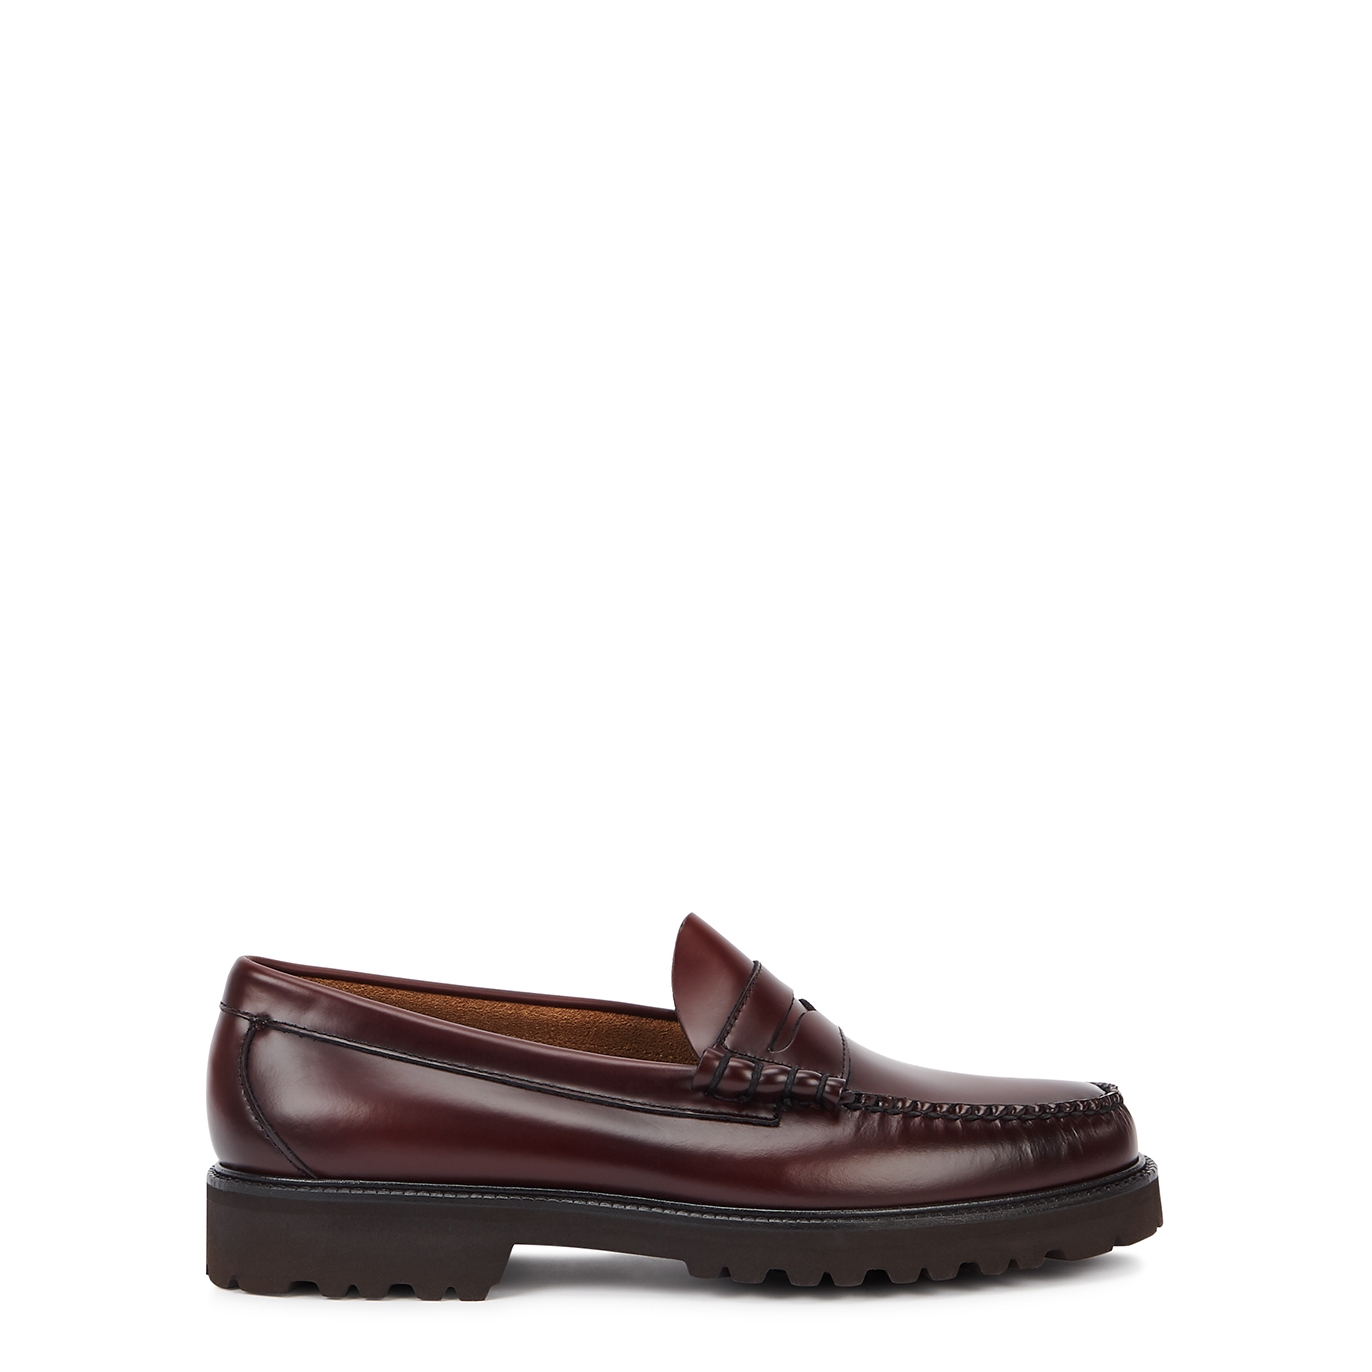 G.H Bass & Co Weejuns 90 Larson Burgundy Leather Loafers - 10